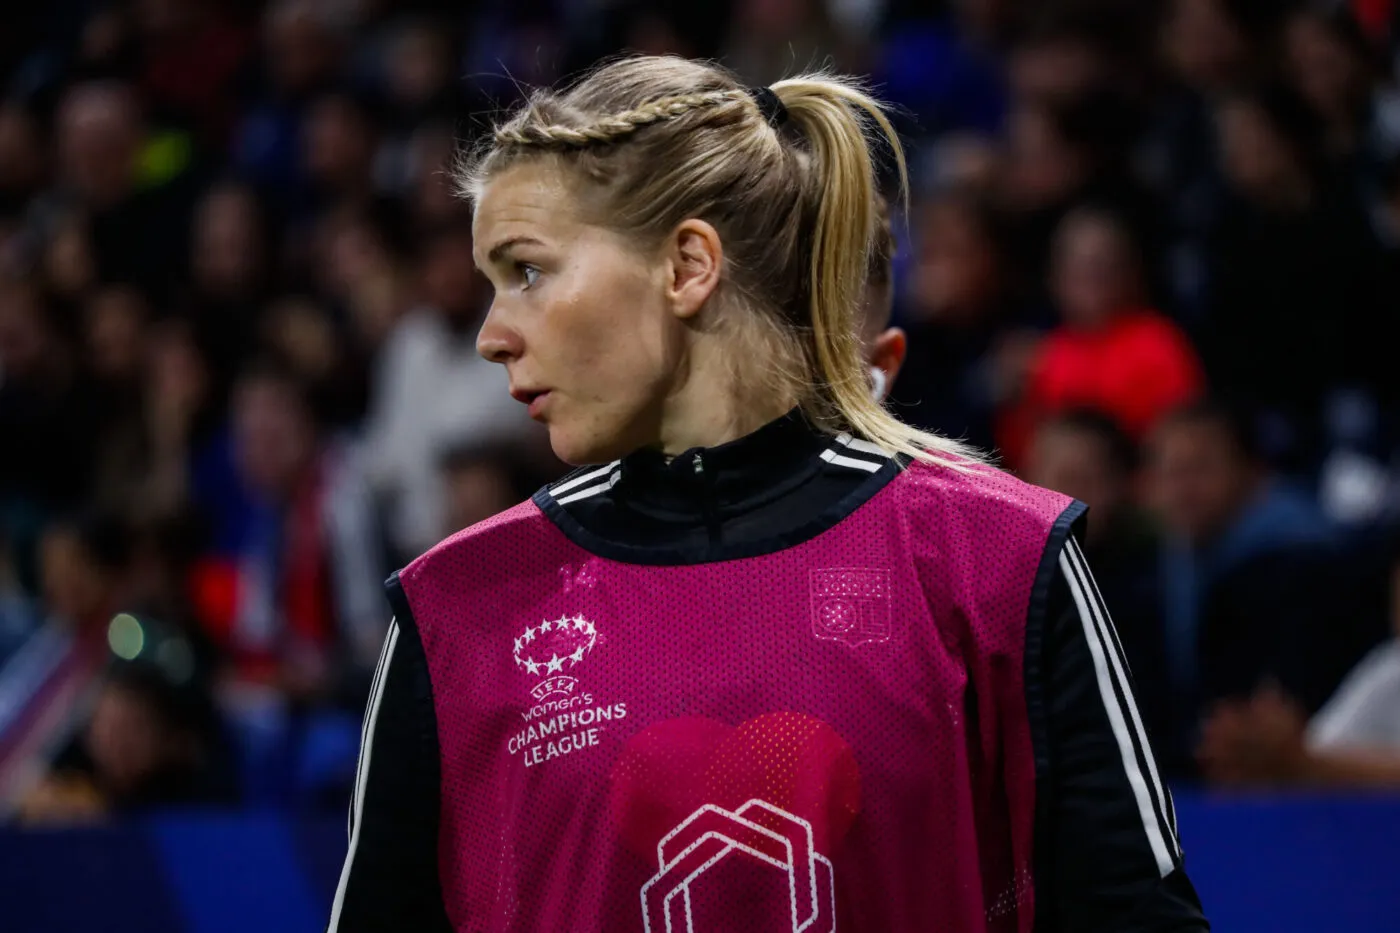 Ada HEGERBERG of Lyon during the Women's Champions League match between Lyon and Chelsea on March 22, 2023 in Lyon, France. (Photo by Romain Biard/Icon Sport)